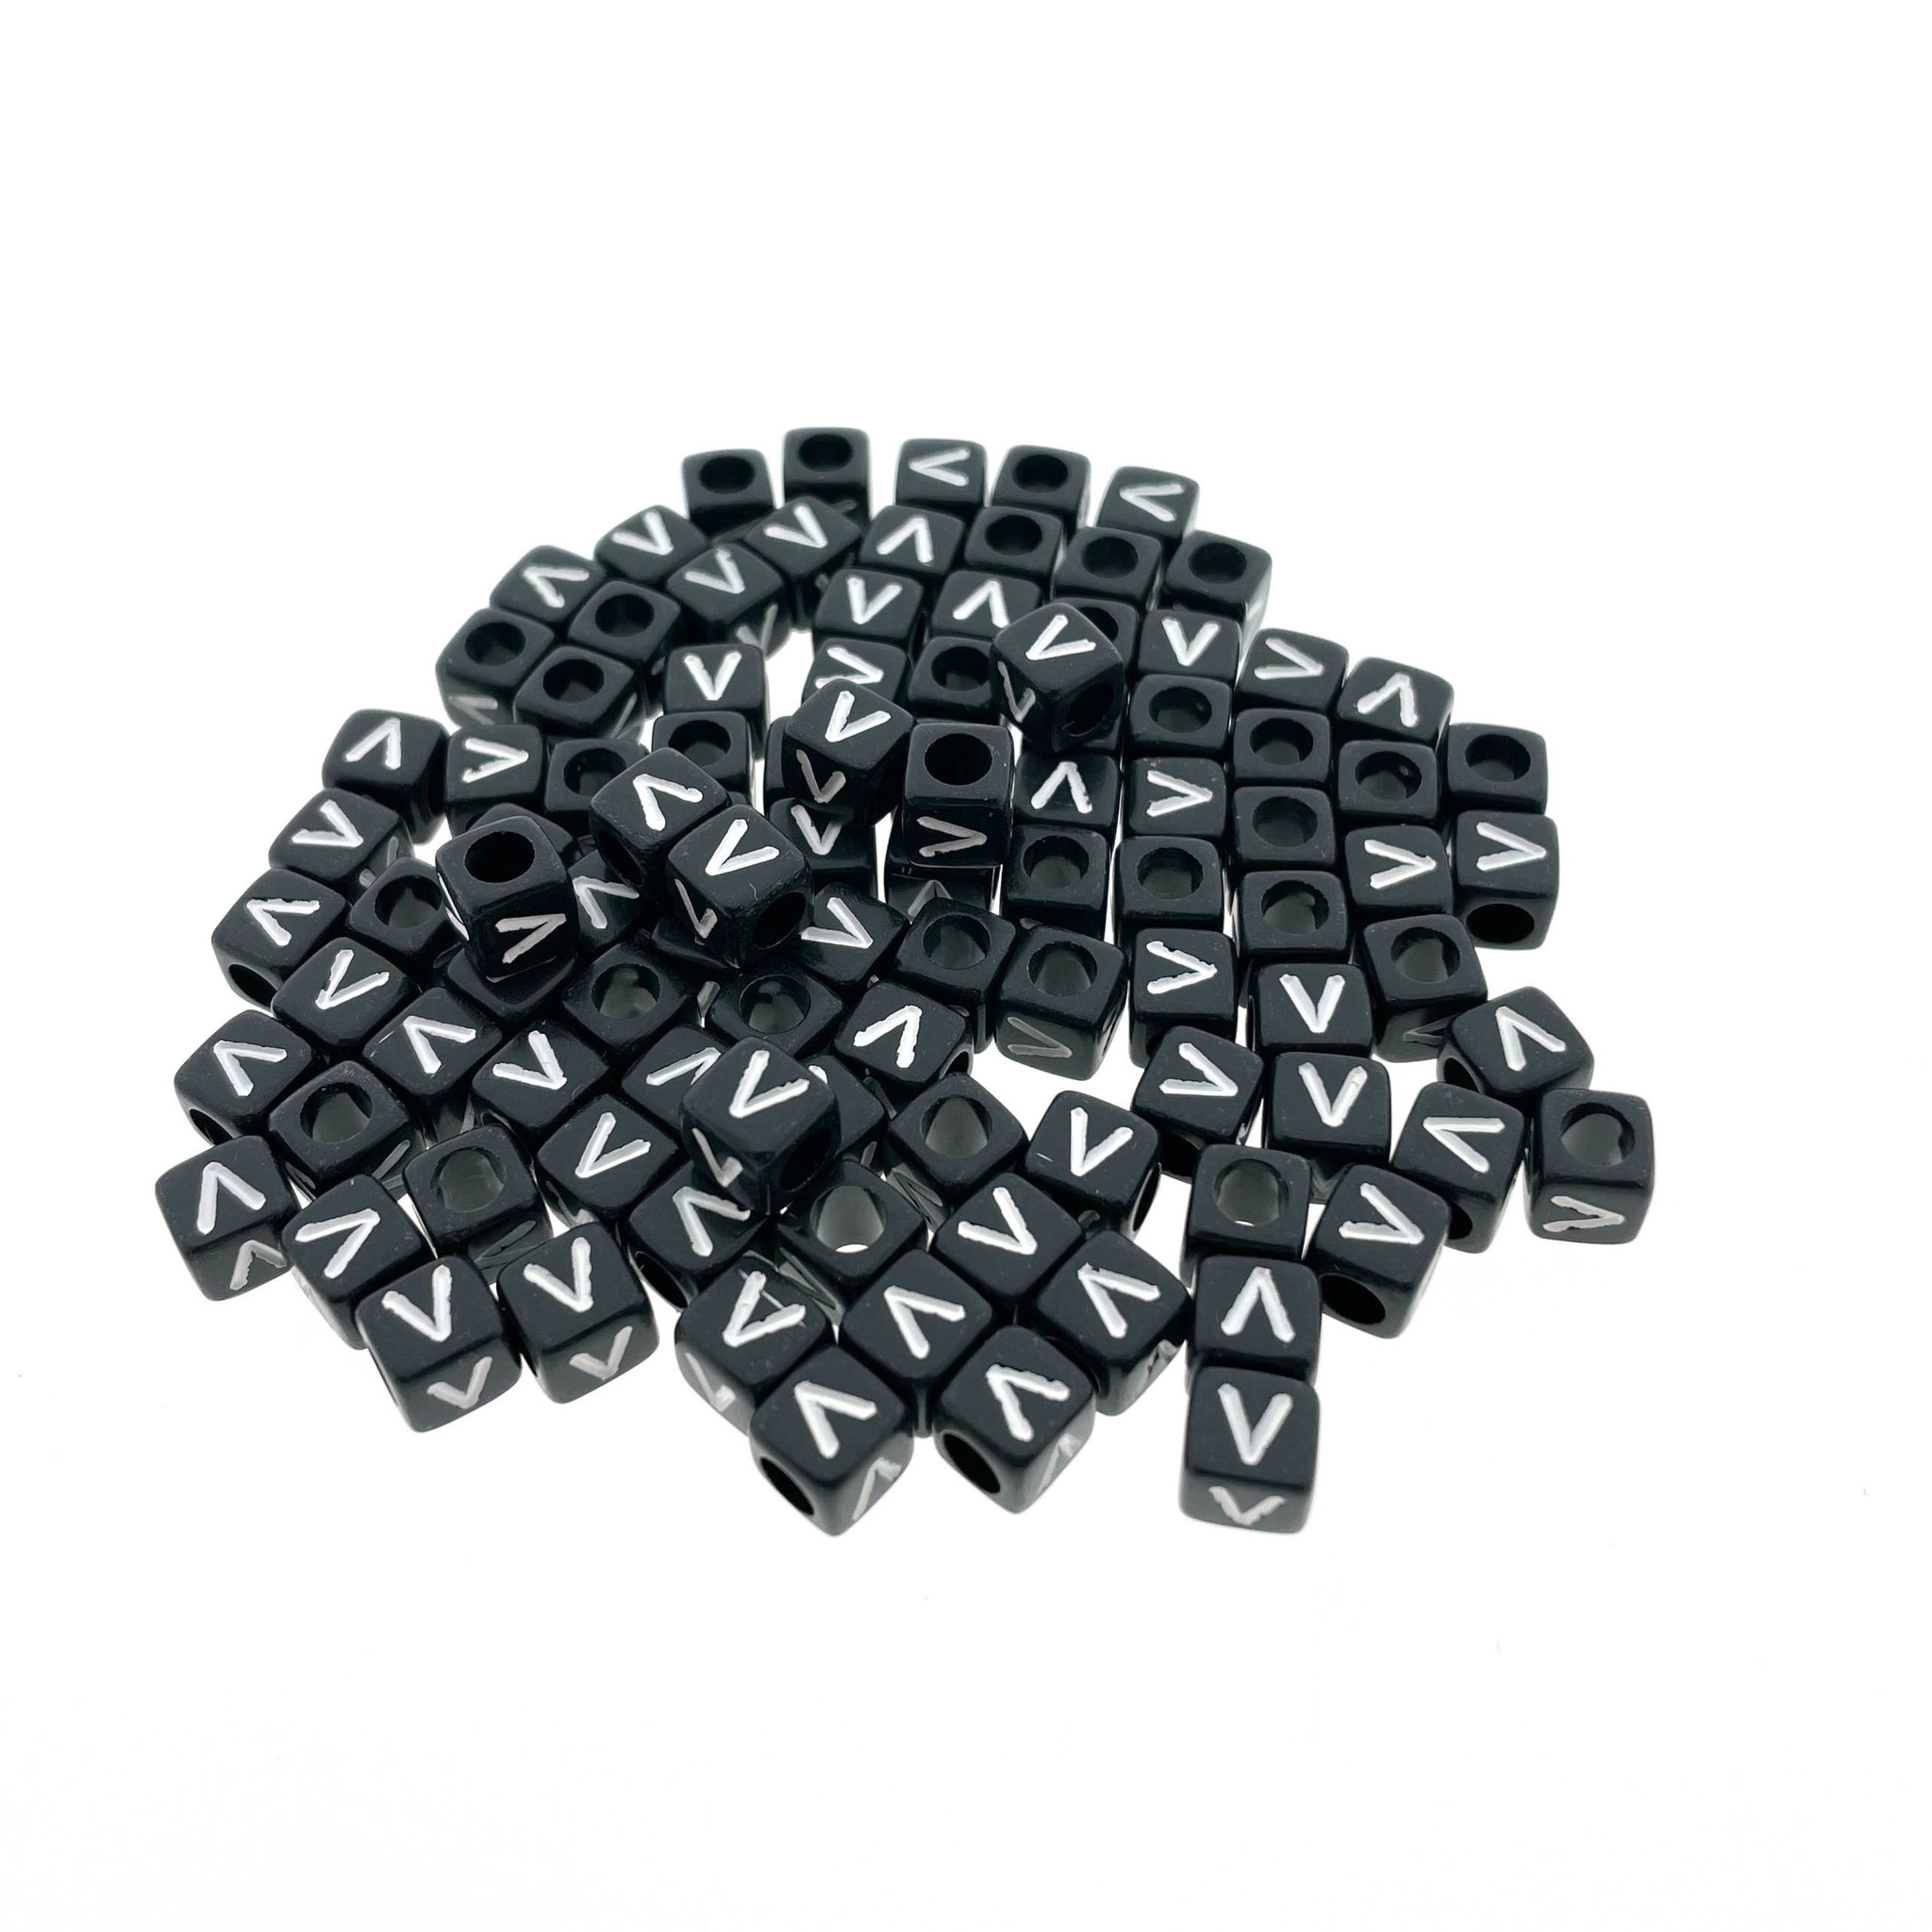 Buy Paracord alphabet letter beads Black B at 123Paracord - 123Paracord